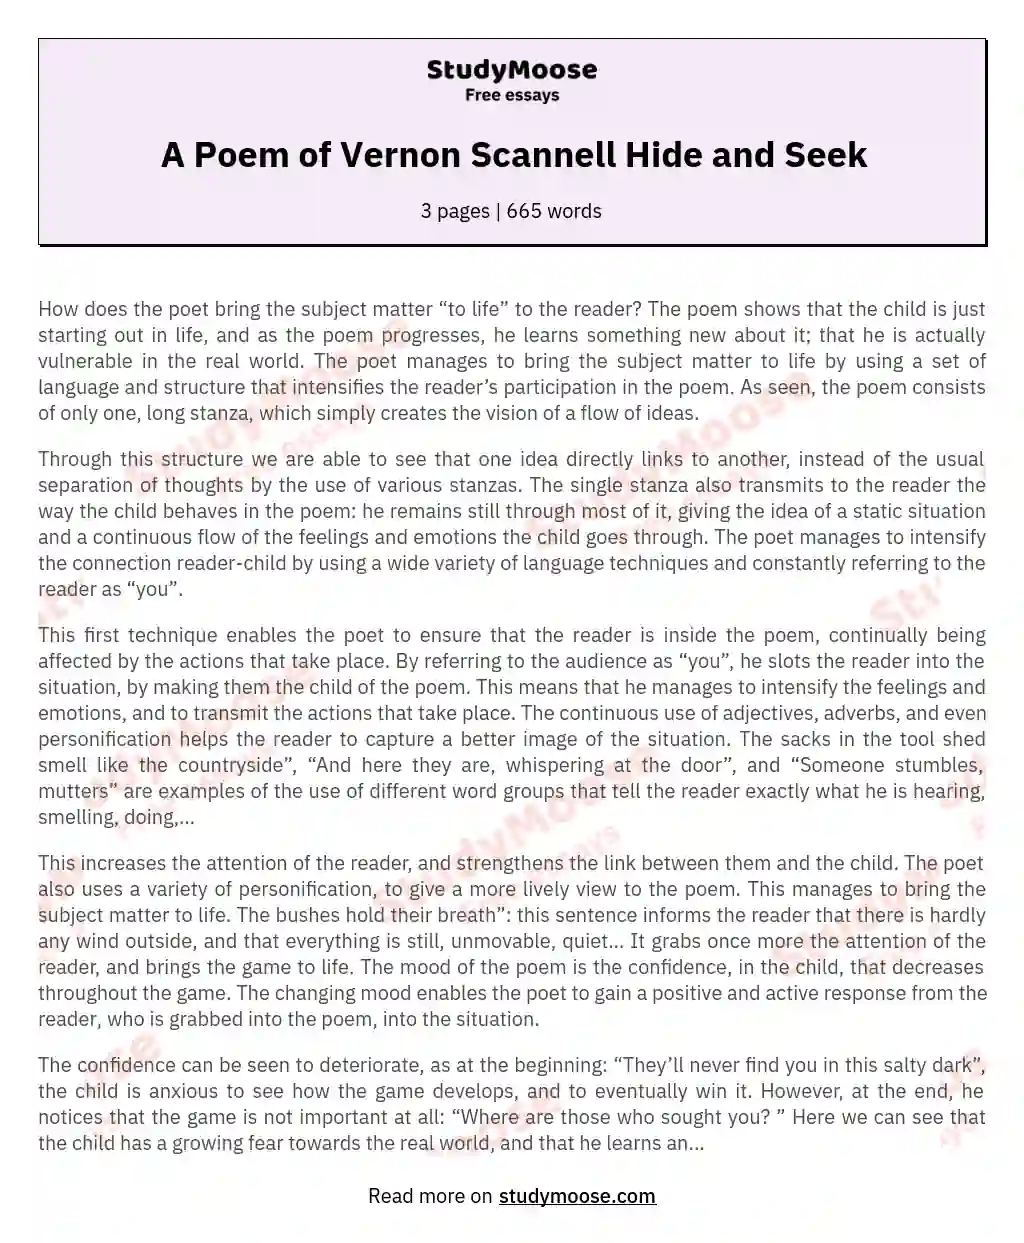 A Poem of Vernon Scannell Hide and Seek essay